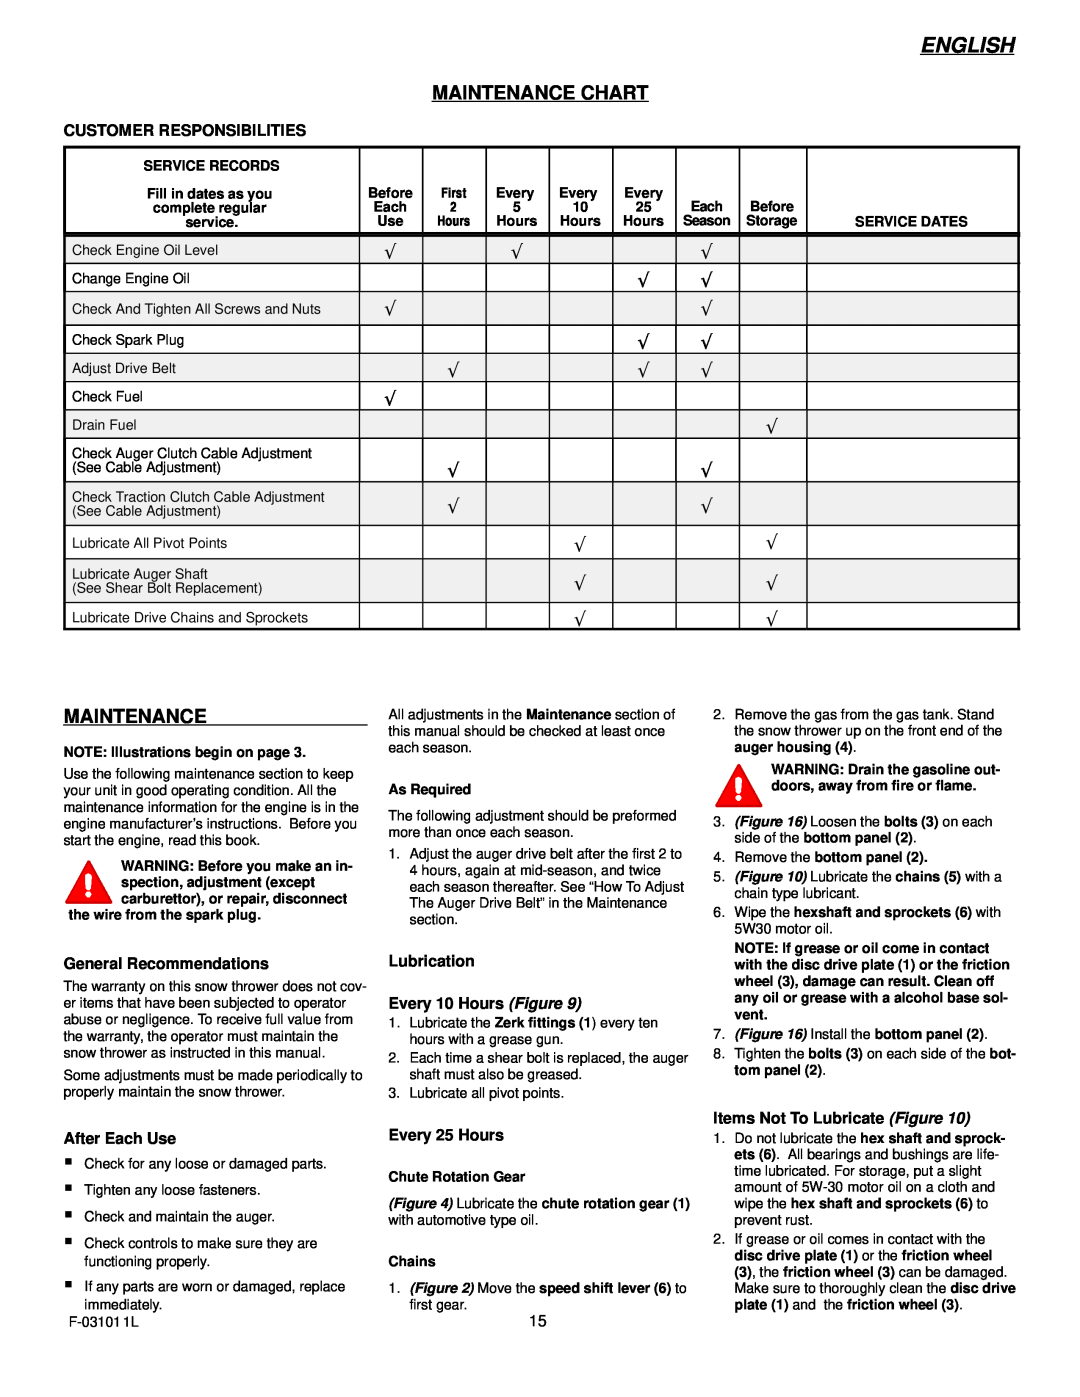 Murray 624504x4C manual English, Maintenance Chart, Customer Responsibilities, General Recommendations, After Each Use 